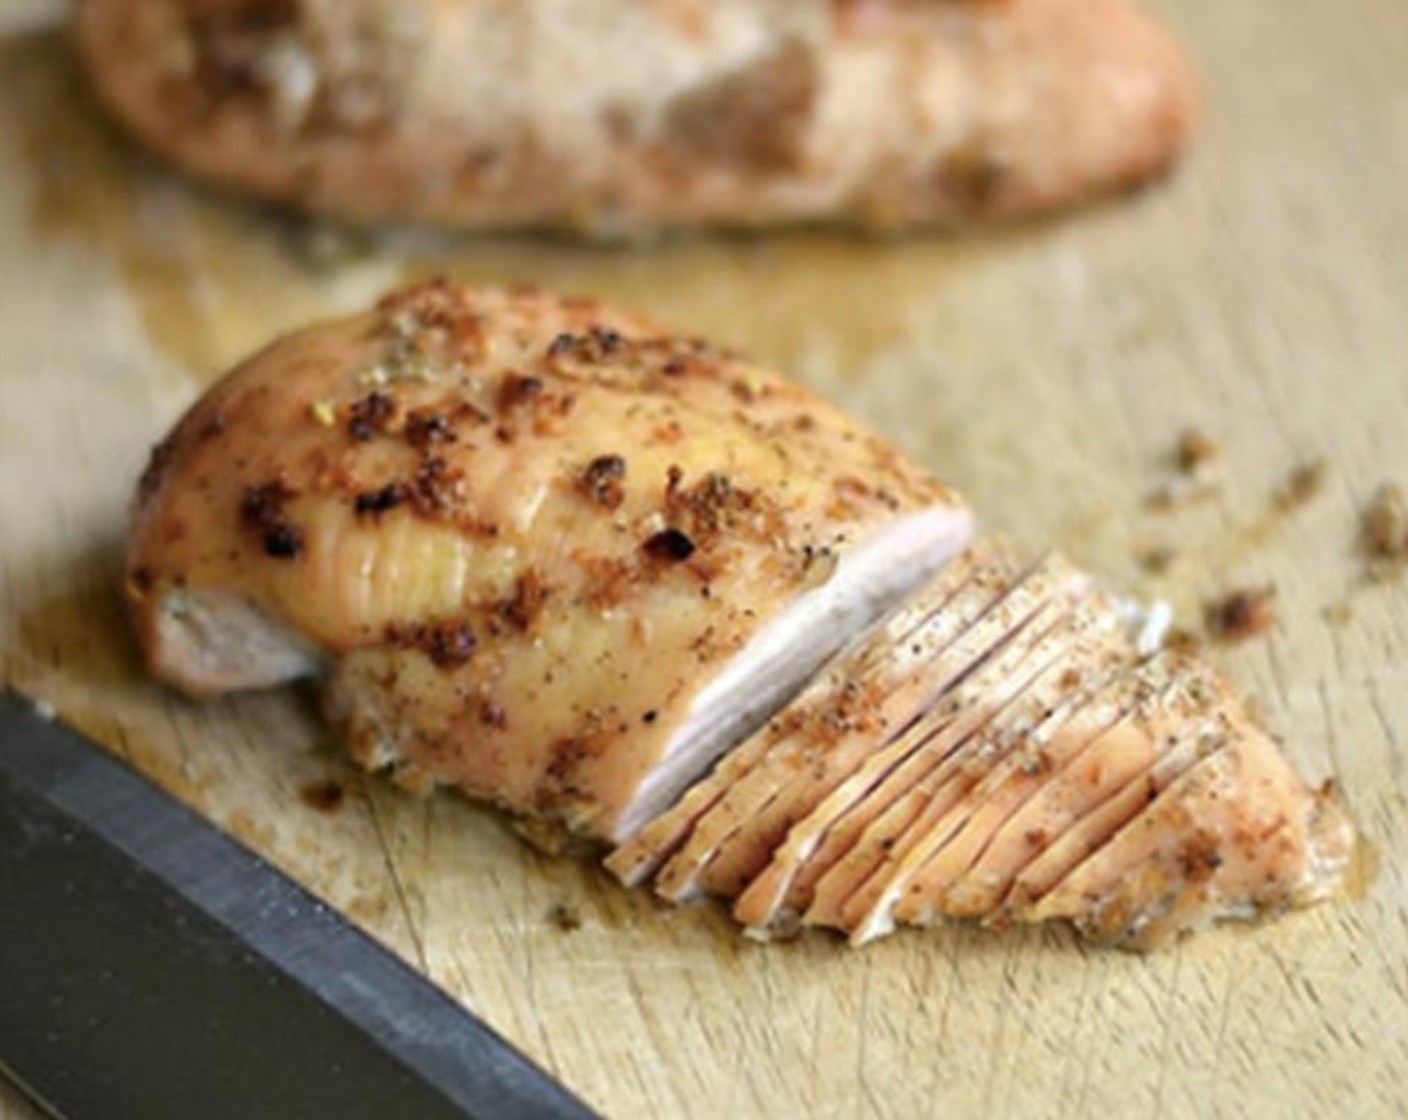 step 5 When chicken is done, let it cool. Slice the chicken into thin slices.